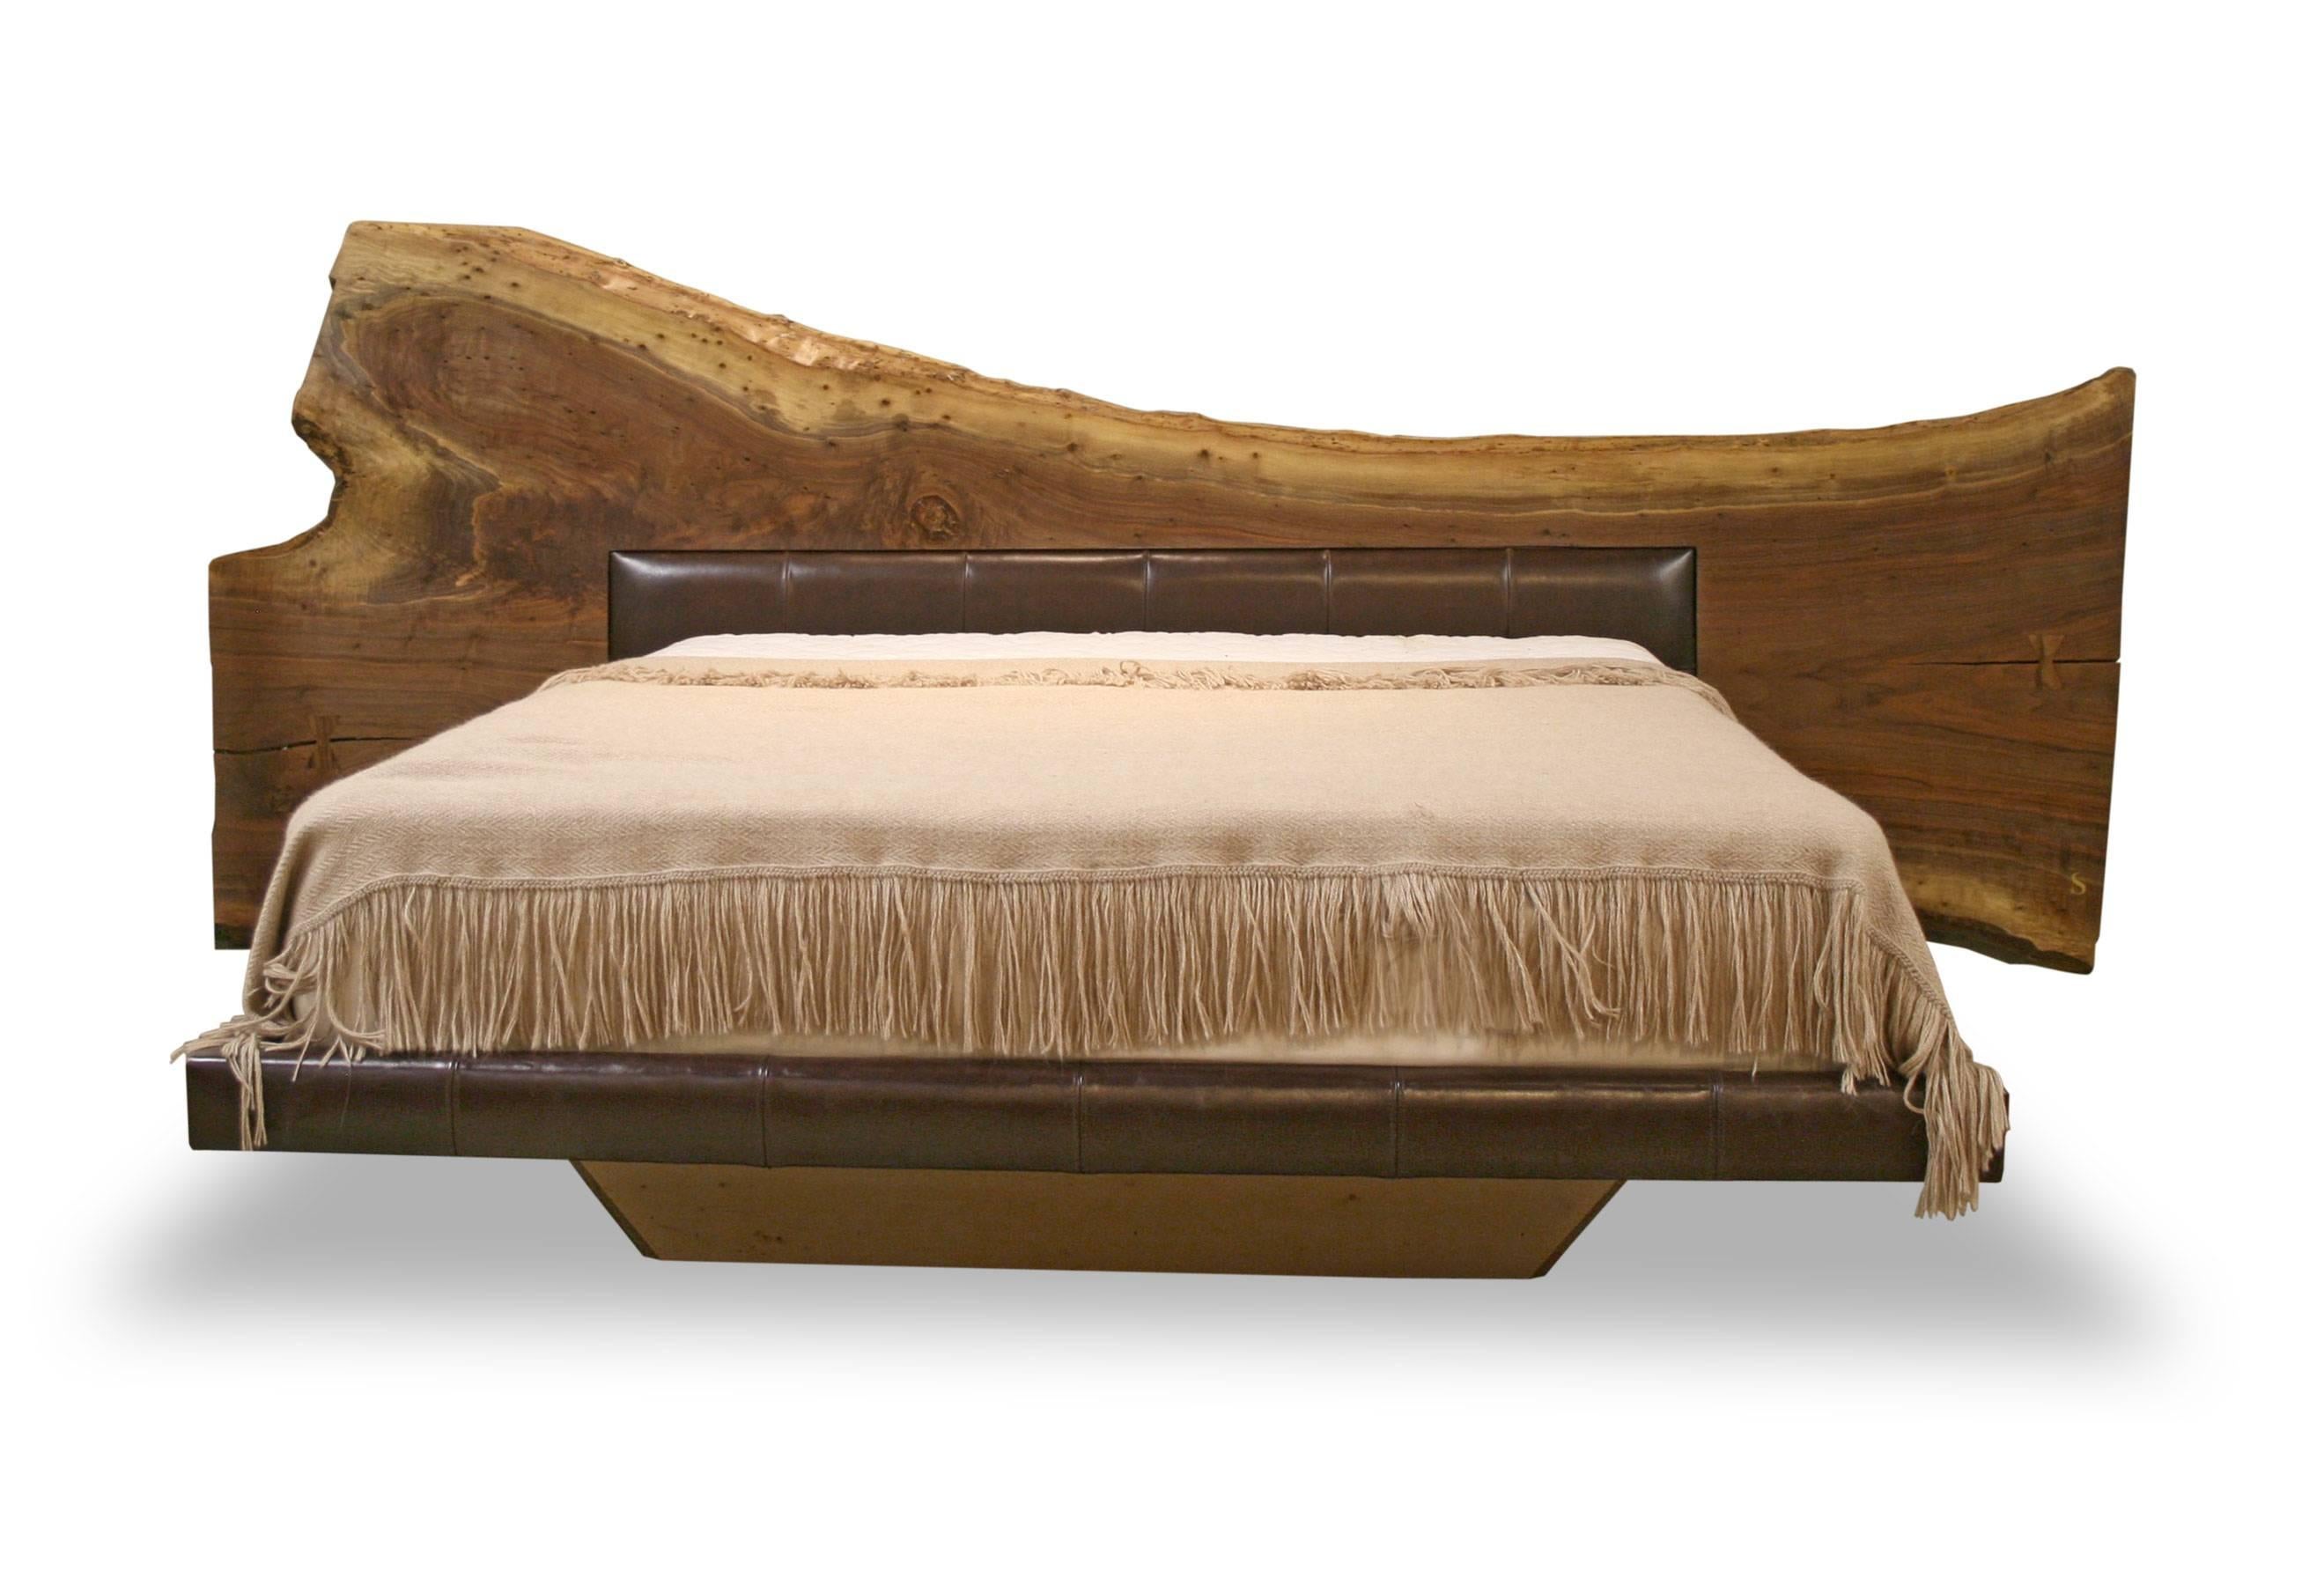 Contemporary Live Edge American Black Walnut Bed Frame with Leather Headboard, Queen Sized